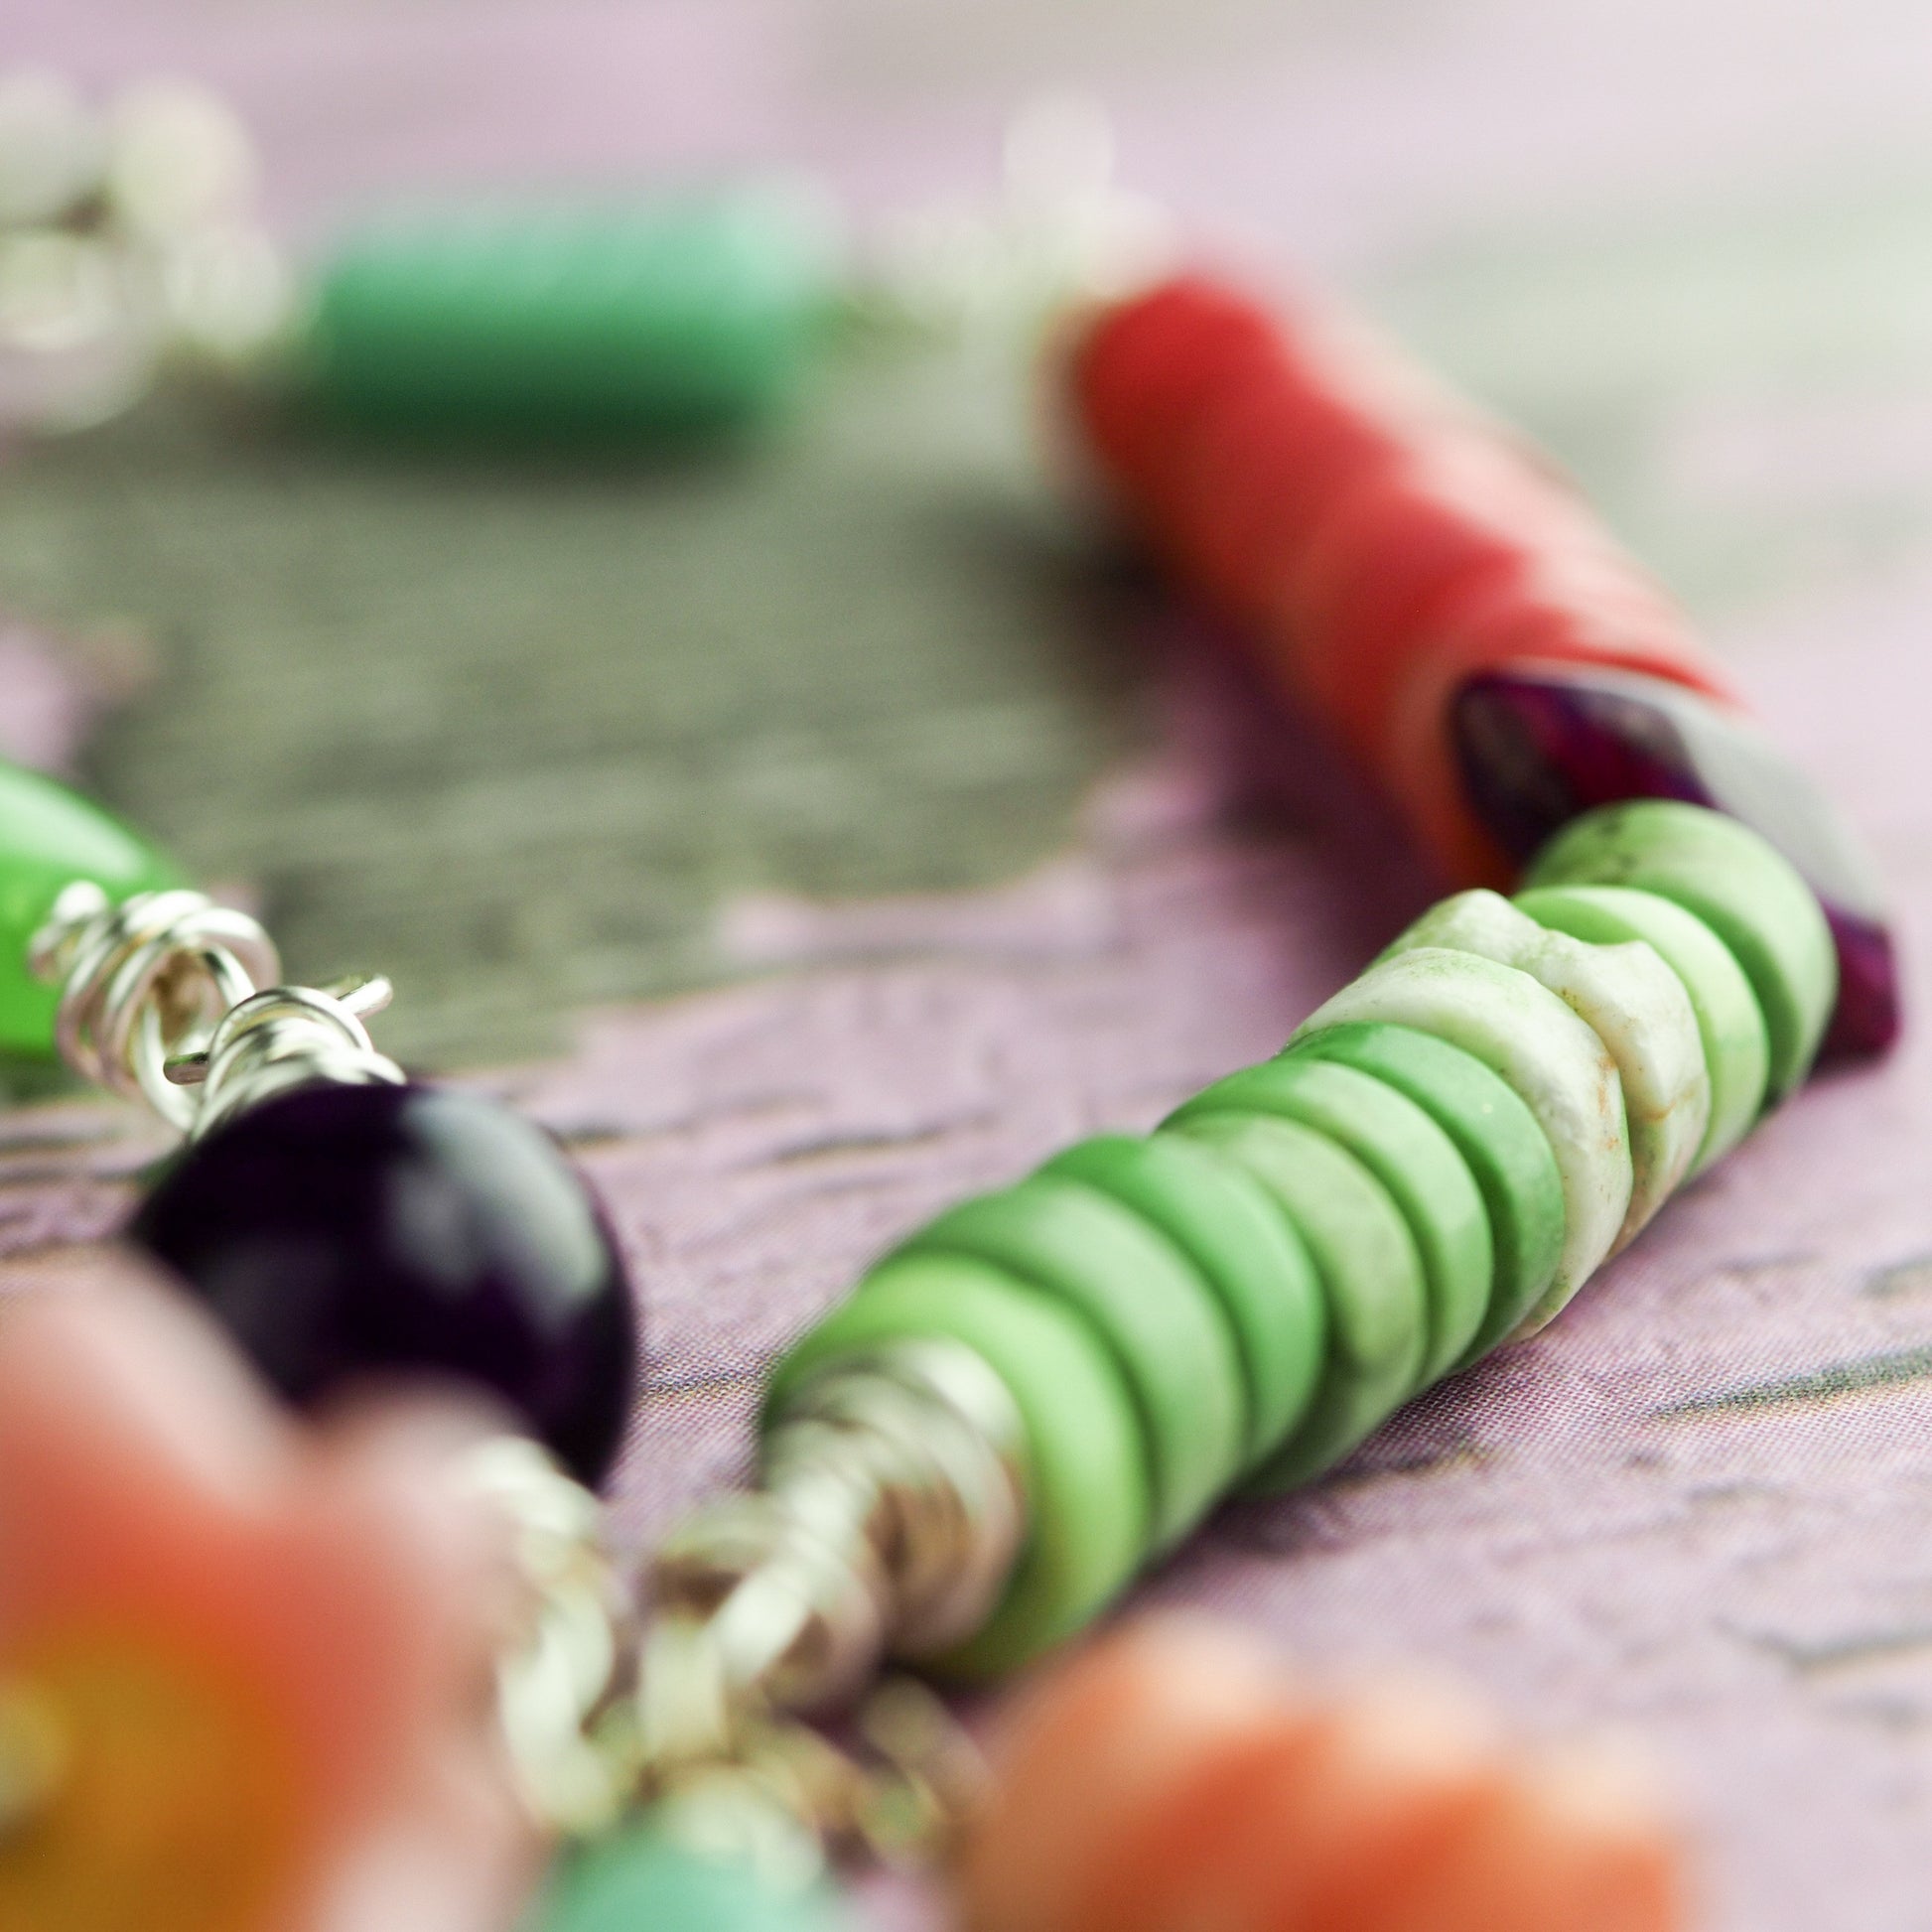 Two sisters enjoy the joy of baking in this original bracelet by Da its Art. Glass beads and jade make this colorful and beautiful piece of wearable art.